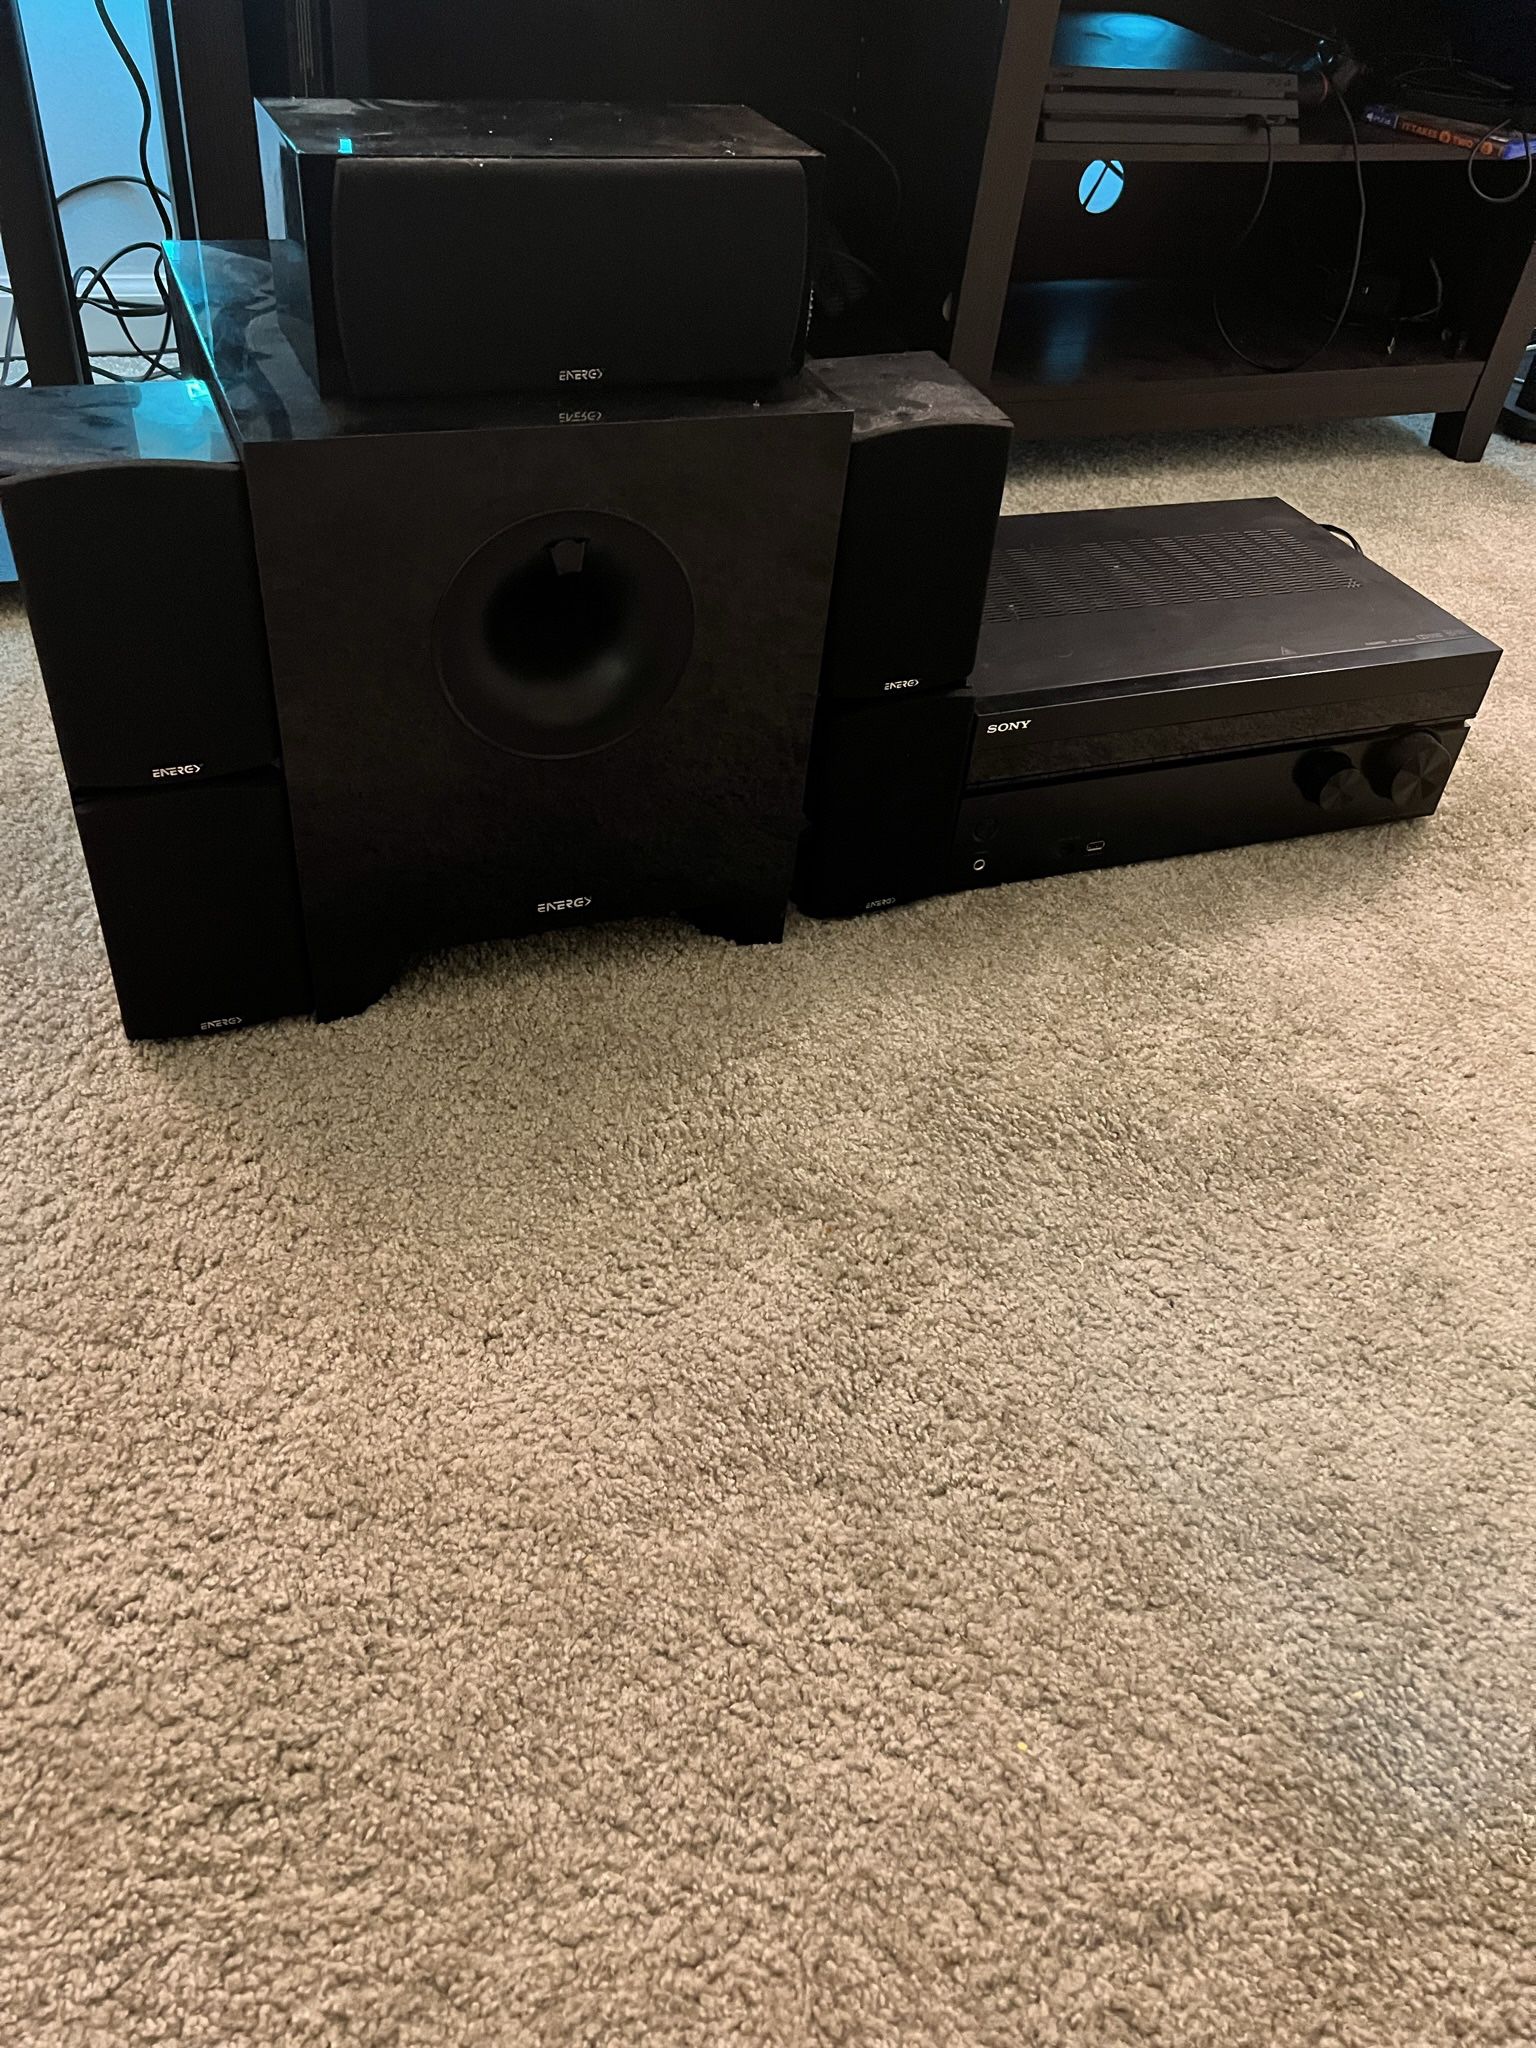 Energy surround 5.1  sound system and Sony Receiver 